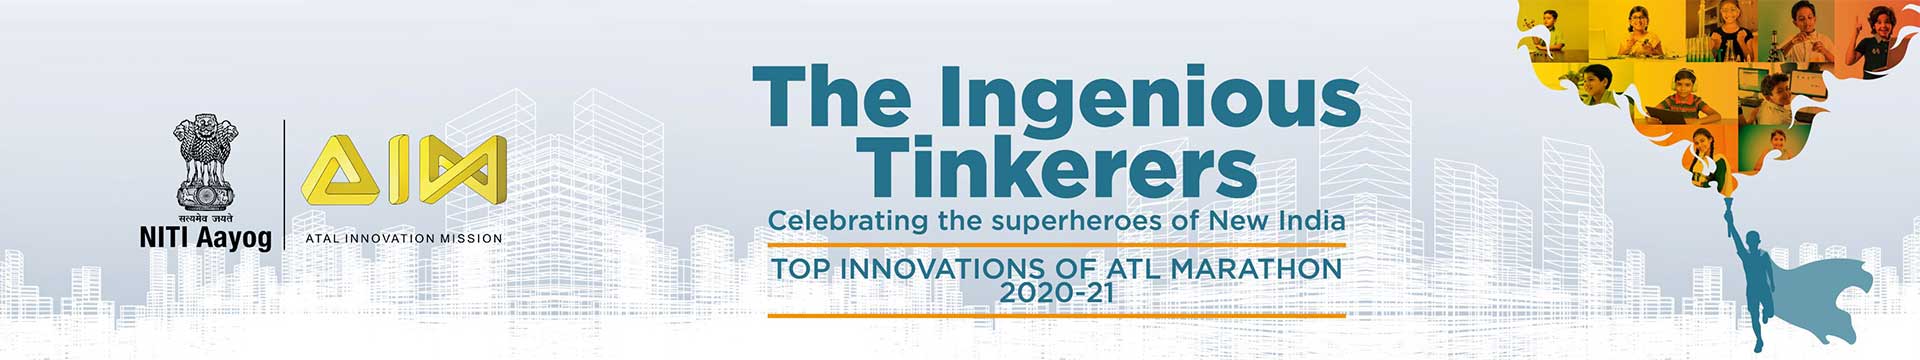 The Ignious Tinkerer